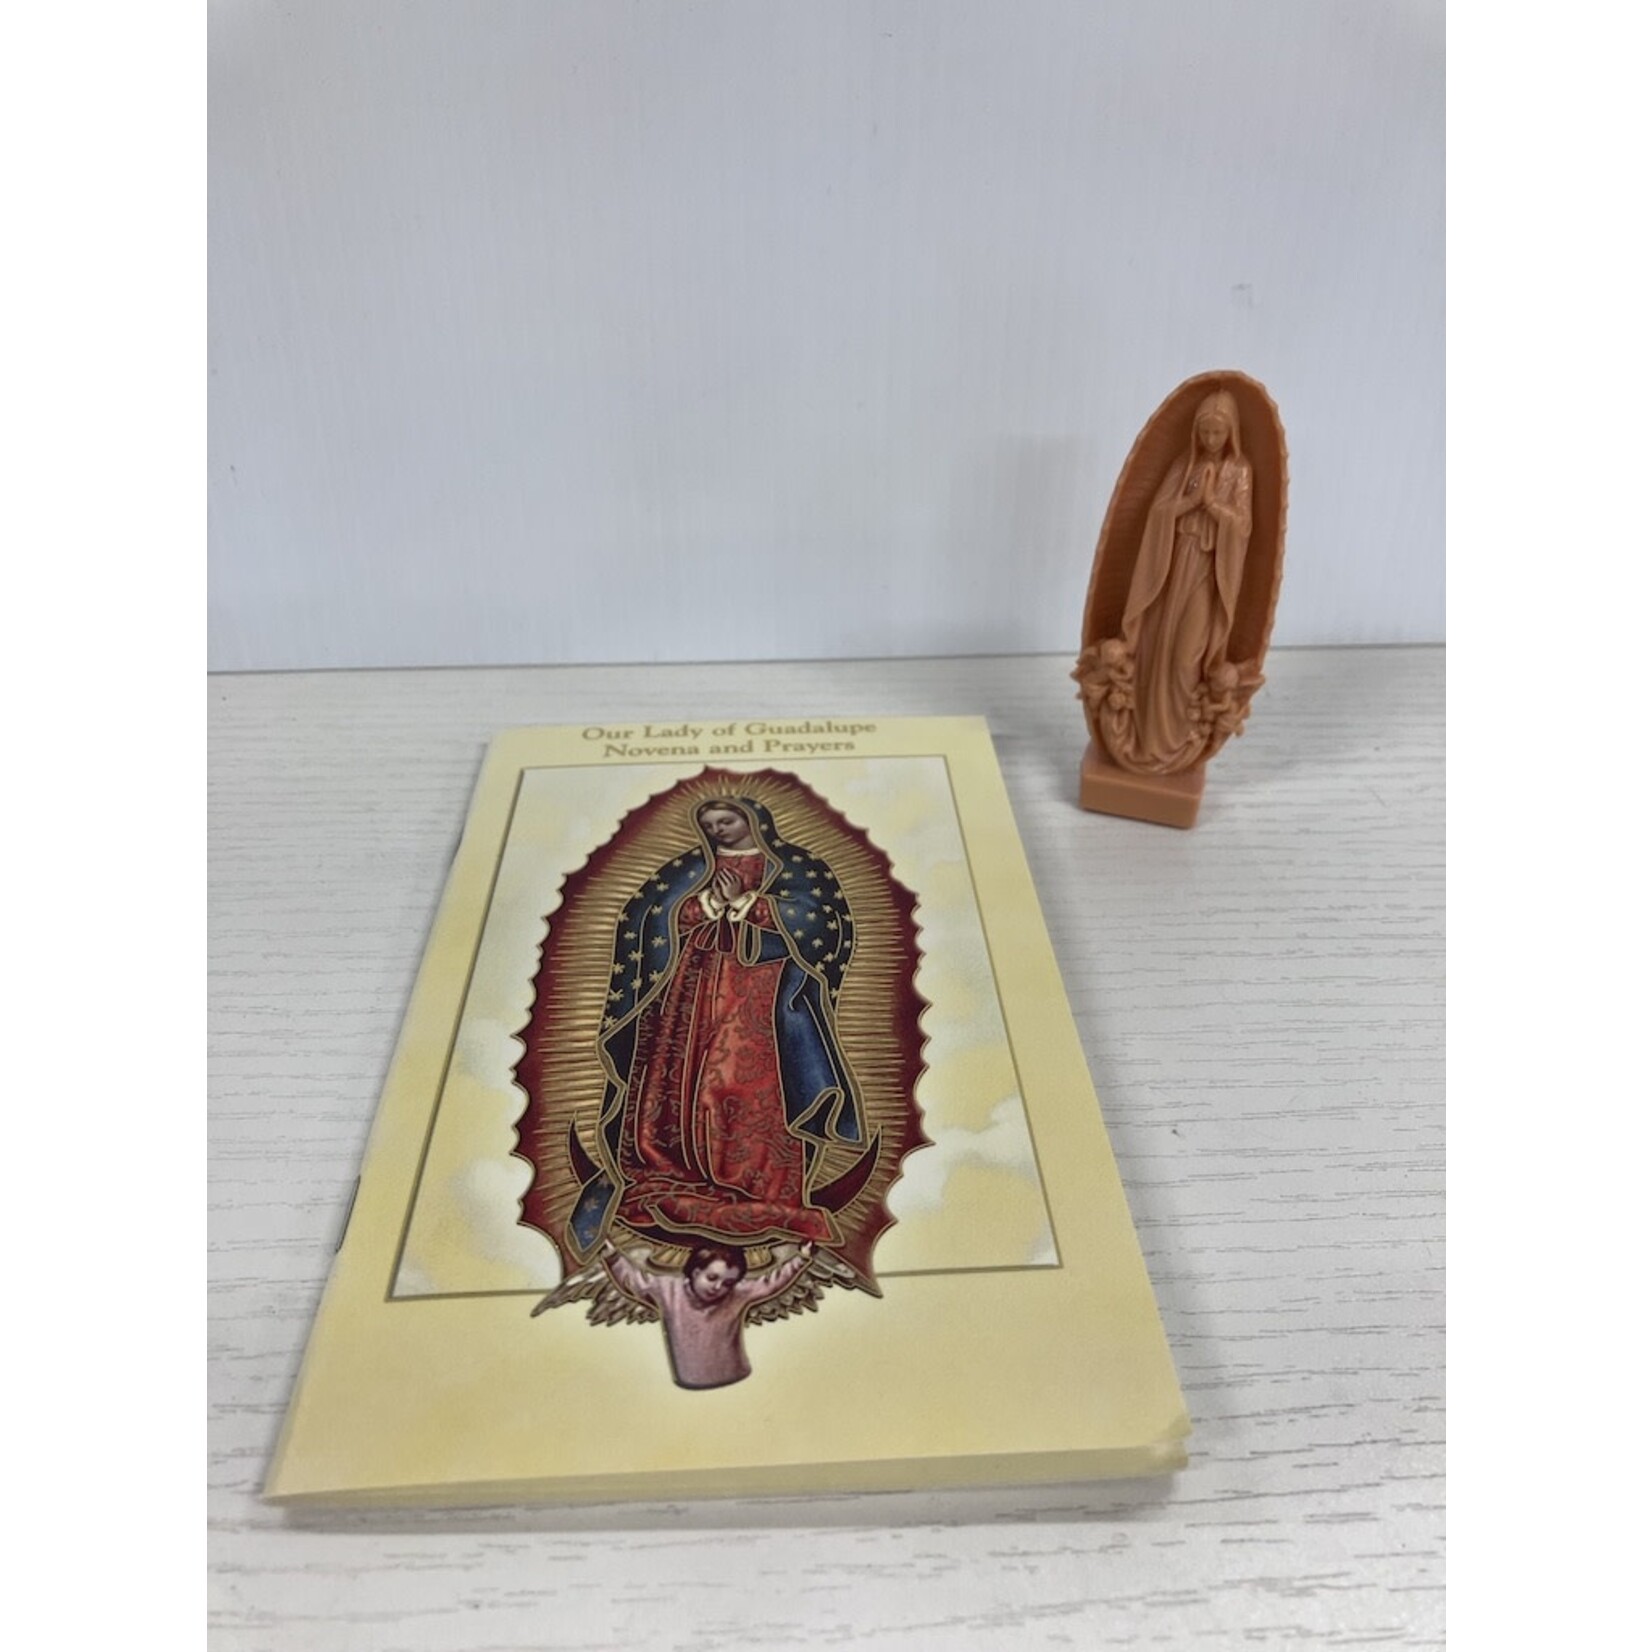 Our Lady of Guadalupe Novena Gift Set